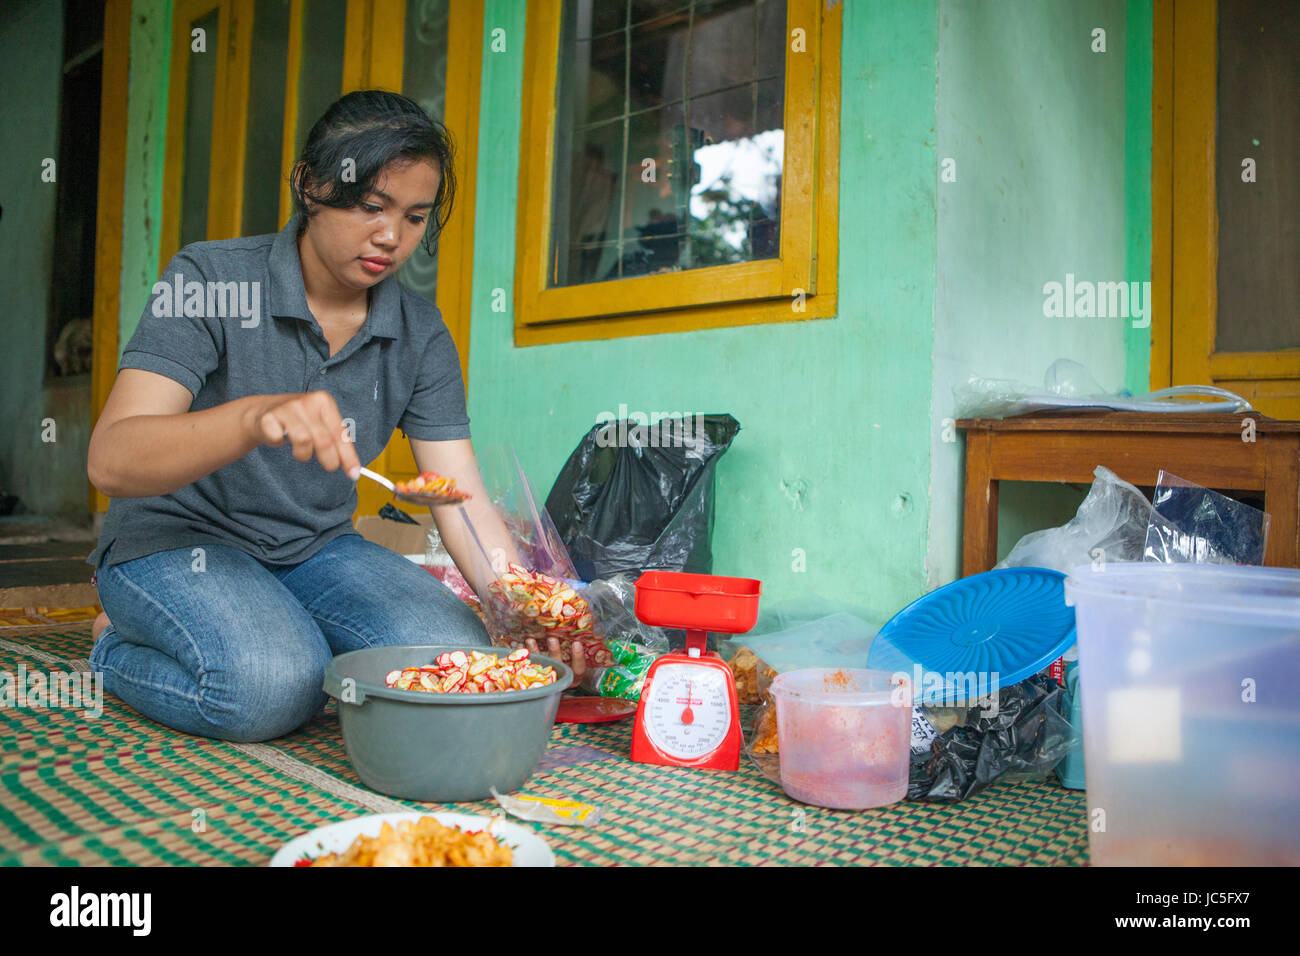 Business woman packaging cakes up to sell, Indonesia, Asia Stock Photo